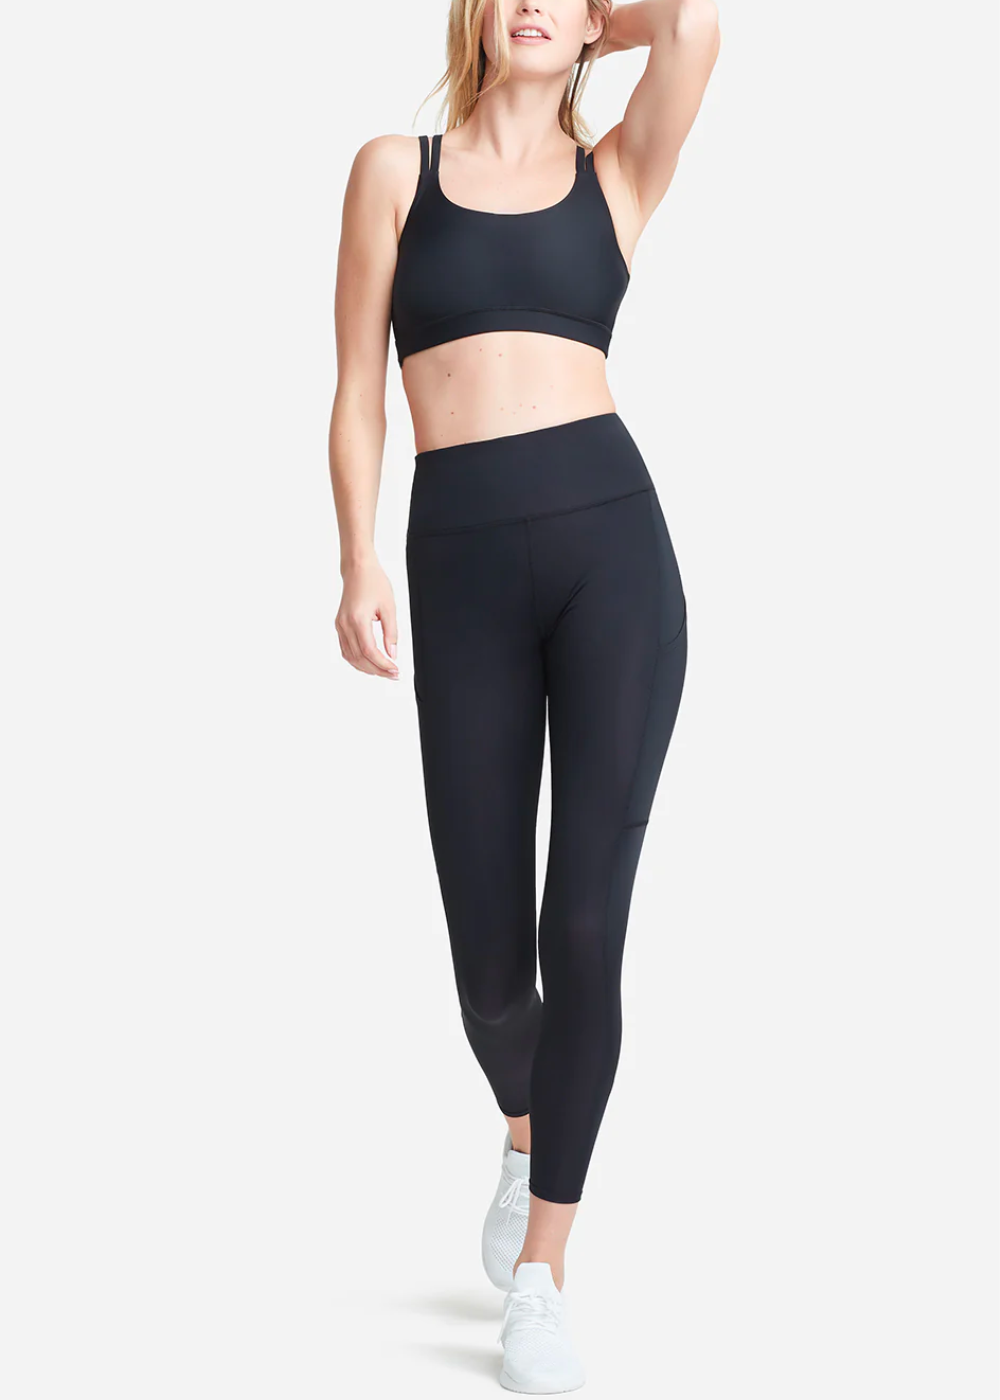 Clothing & Shoes - Bottoms - Leggings - Yummie Rachel Legging With Stripe  And Mesh Pocket - Online Shopping for Canadians